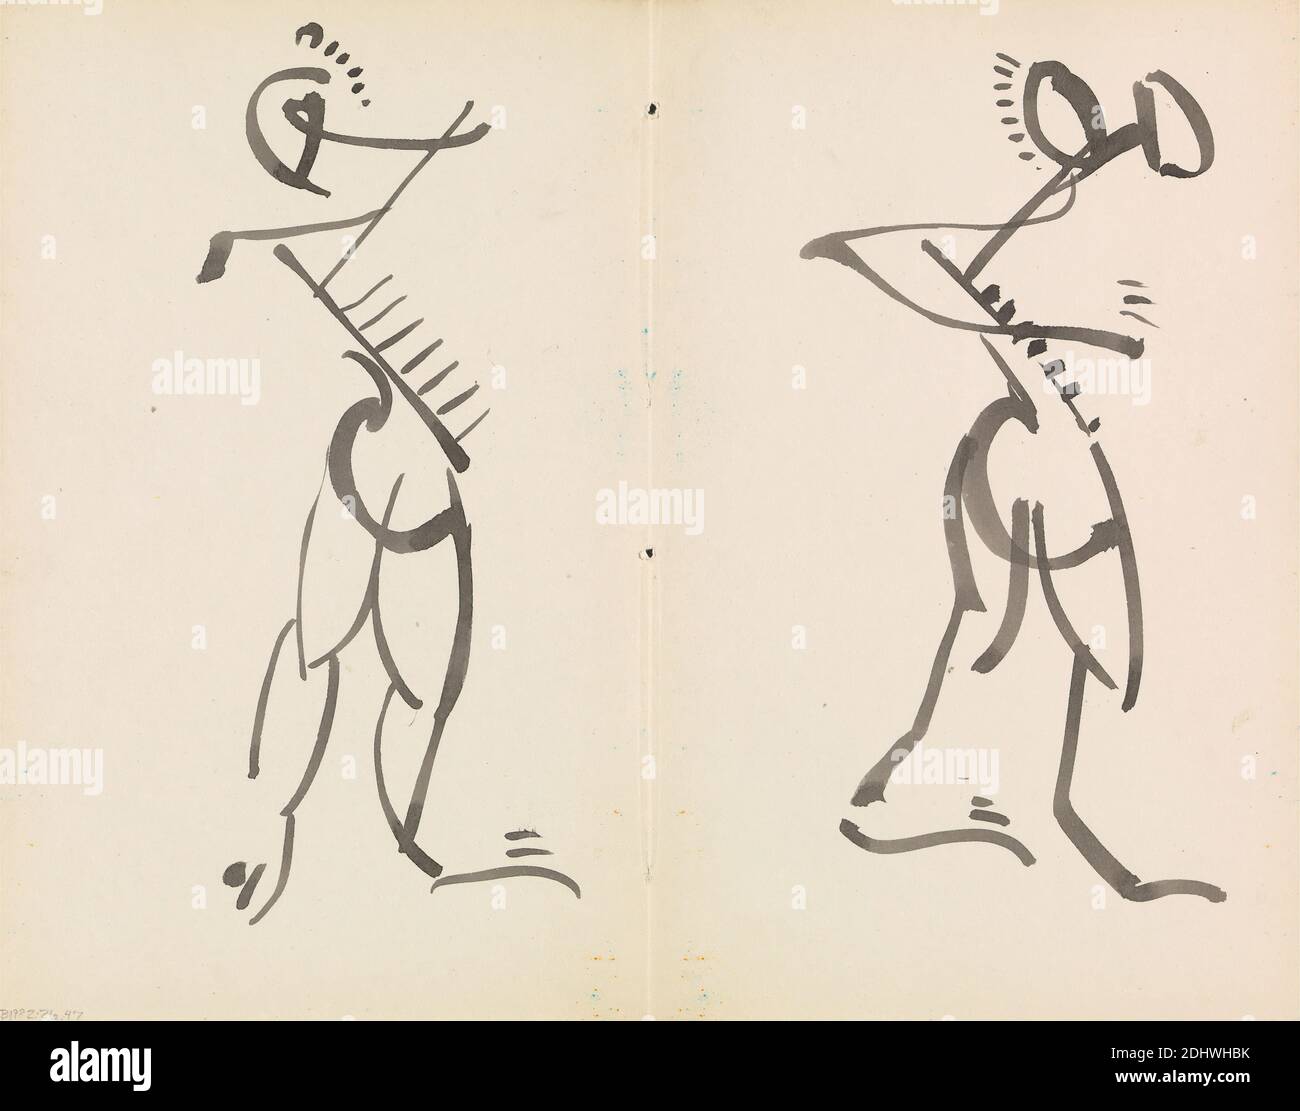 Two Dancing Figures, Henri Gaudier-Brzeska, 1891–1915, French, between 1910 and 1915, Black ink on thin, smooth, cream wove paper, Sheet: 7 x 8 7/8 inches (17.8 x 22.5 cm), abstract art, dance, figure, figure study, Vorticism Stock Photo